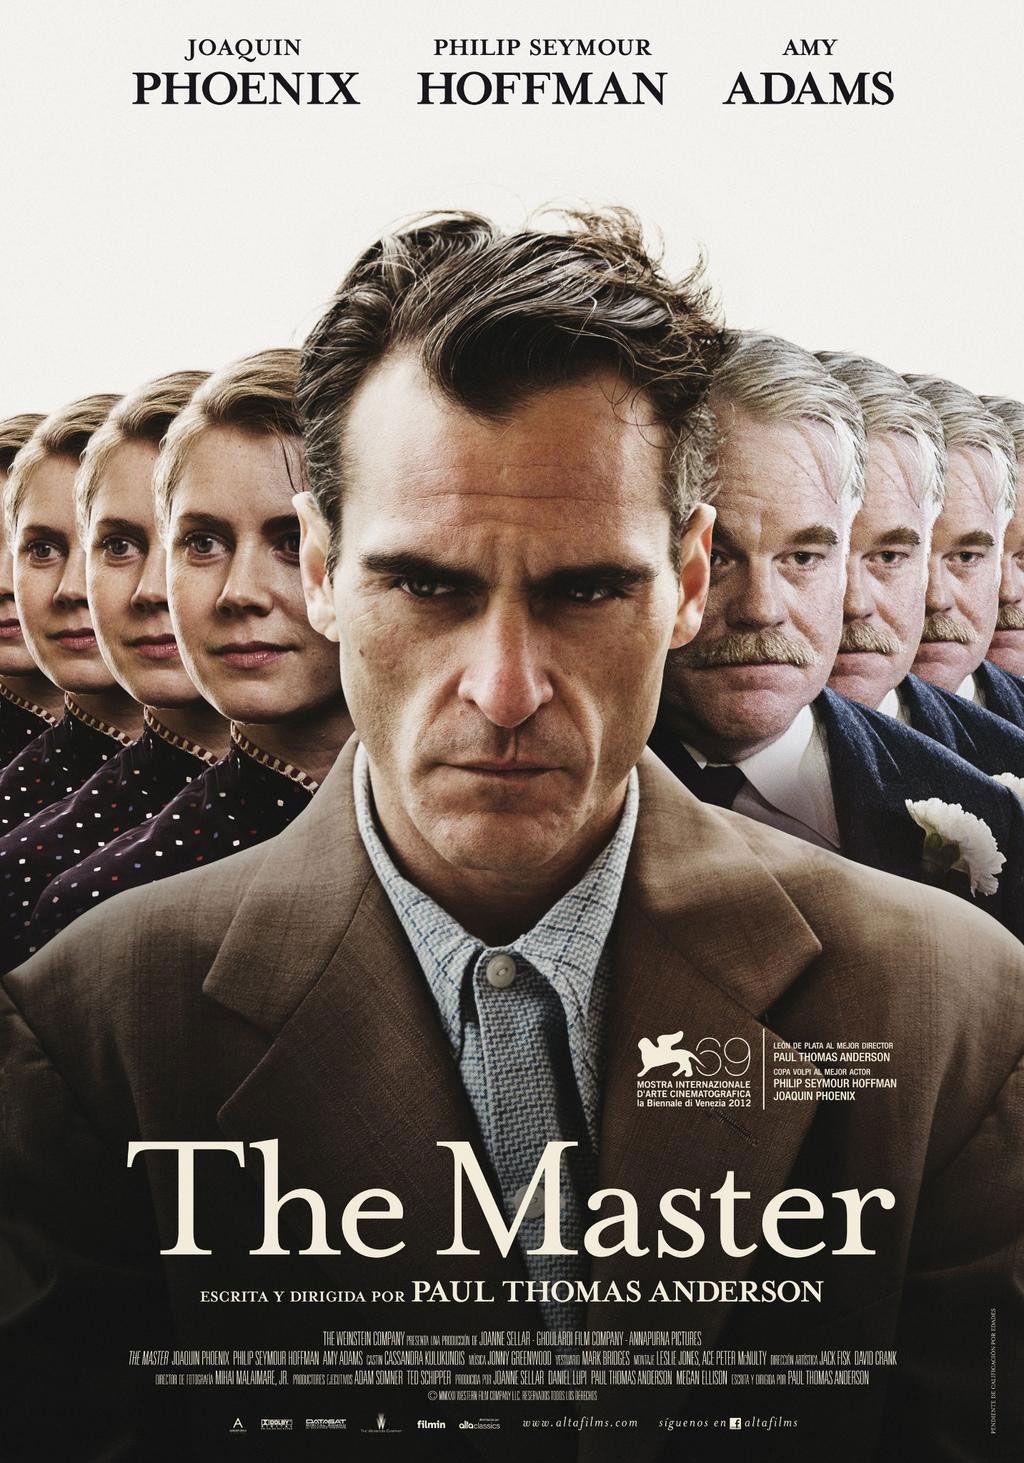 2500x1785px The Master 658.5 KB